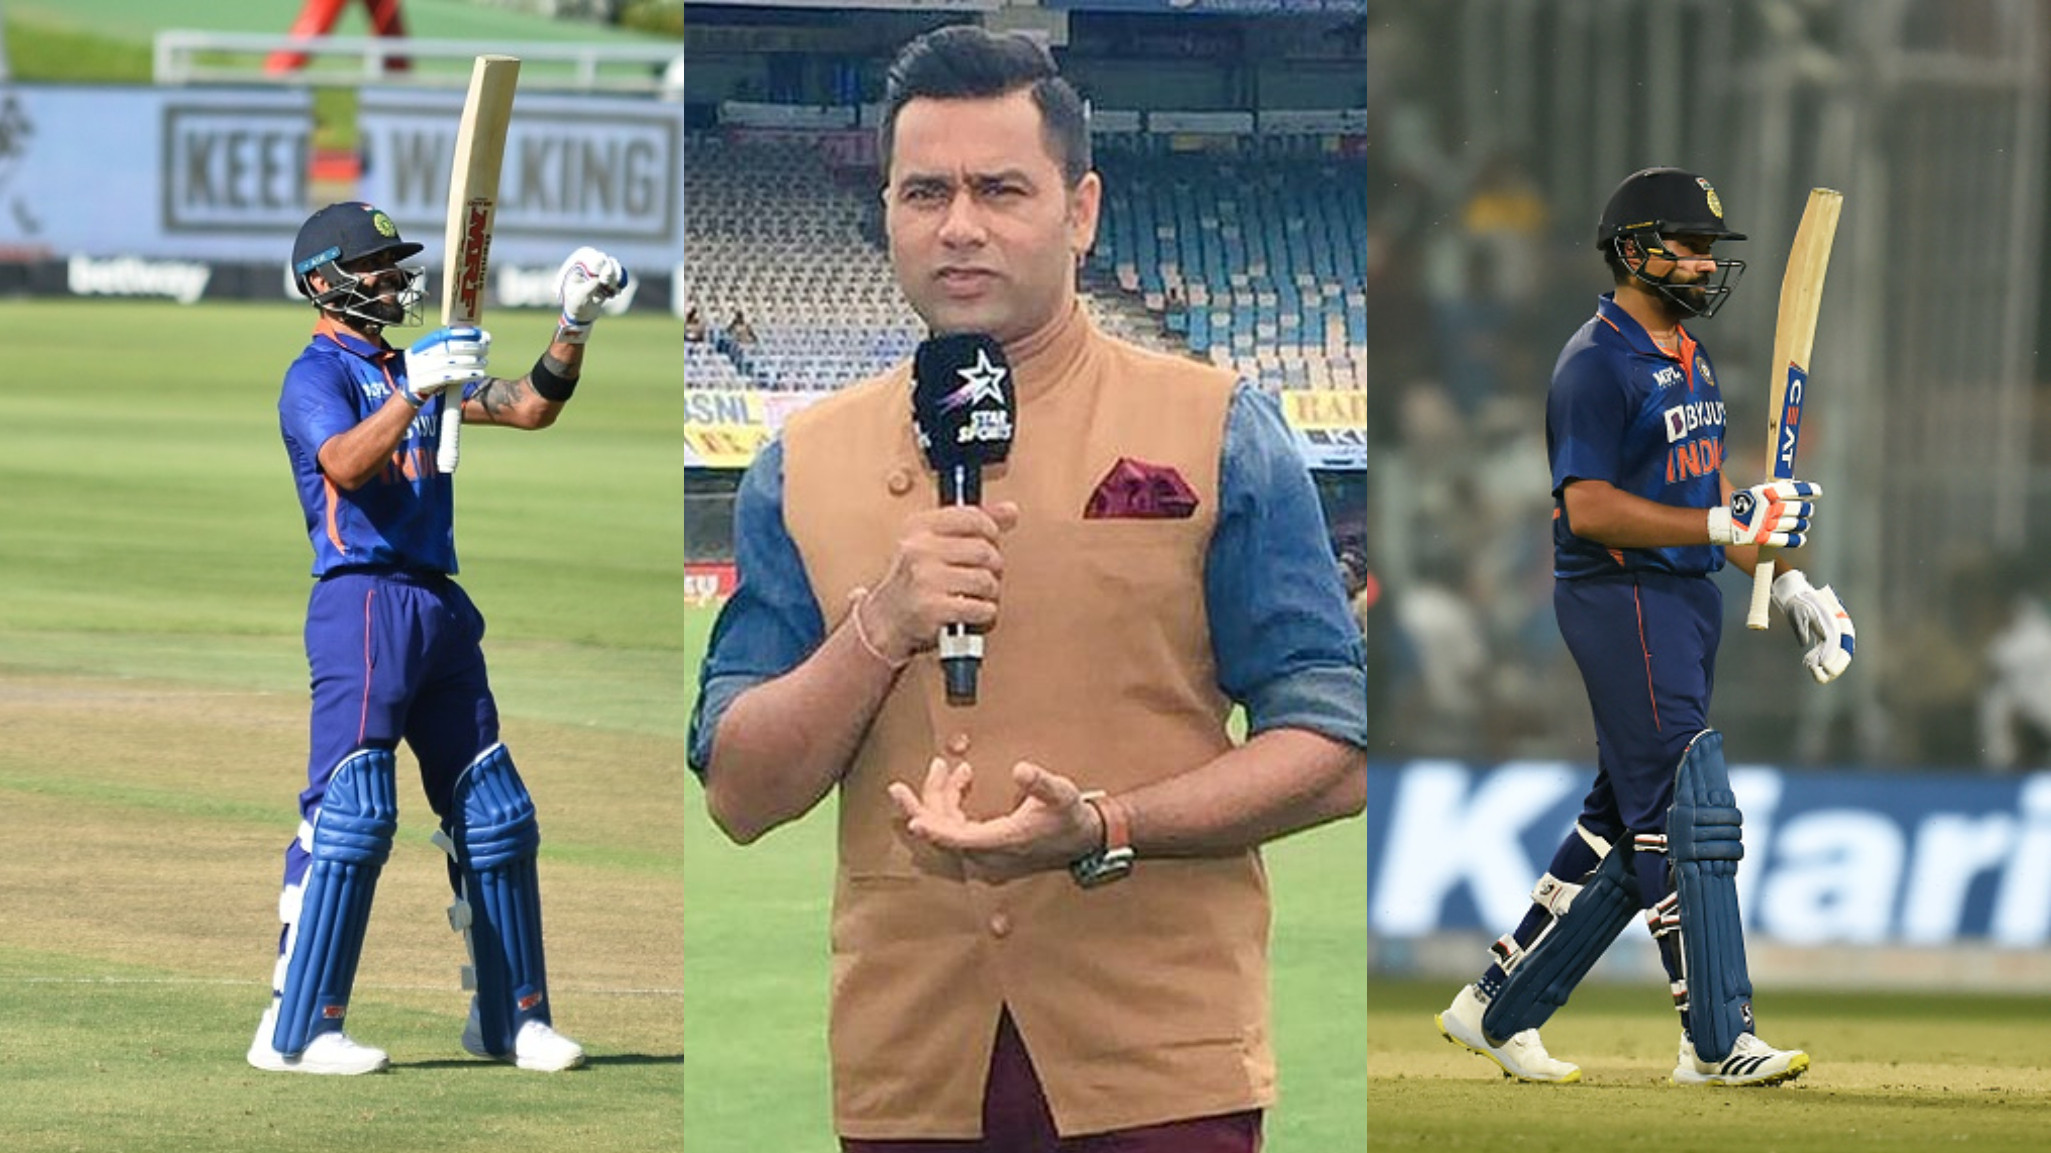 IND v WI 2022: Aakash Chopra opines on how how Rohit's captaincy might liberate Kohli as a batter